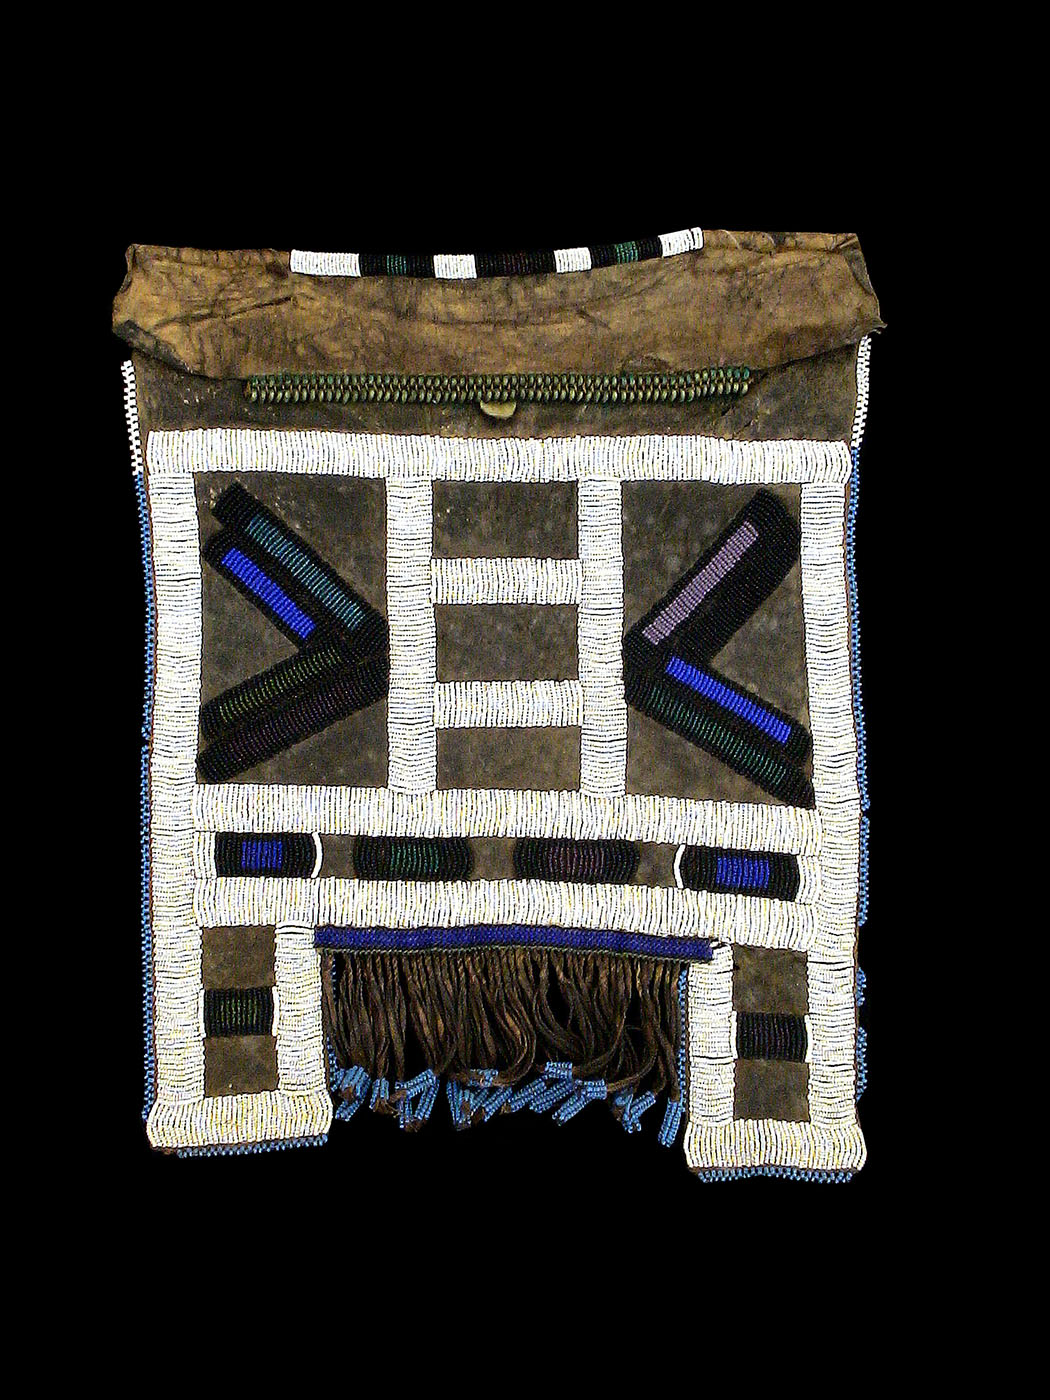 Mapoto Beaded Skirt - Ndebele People, South Africa -1469